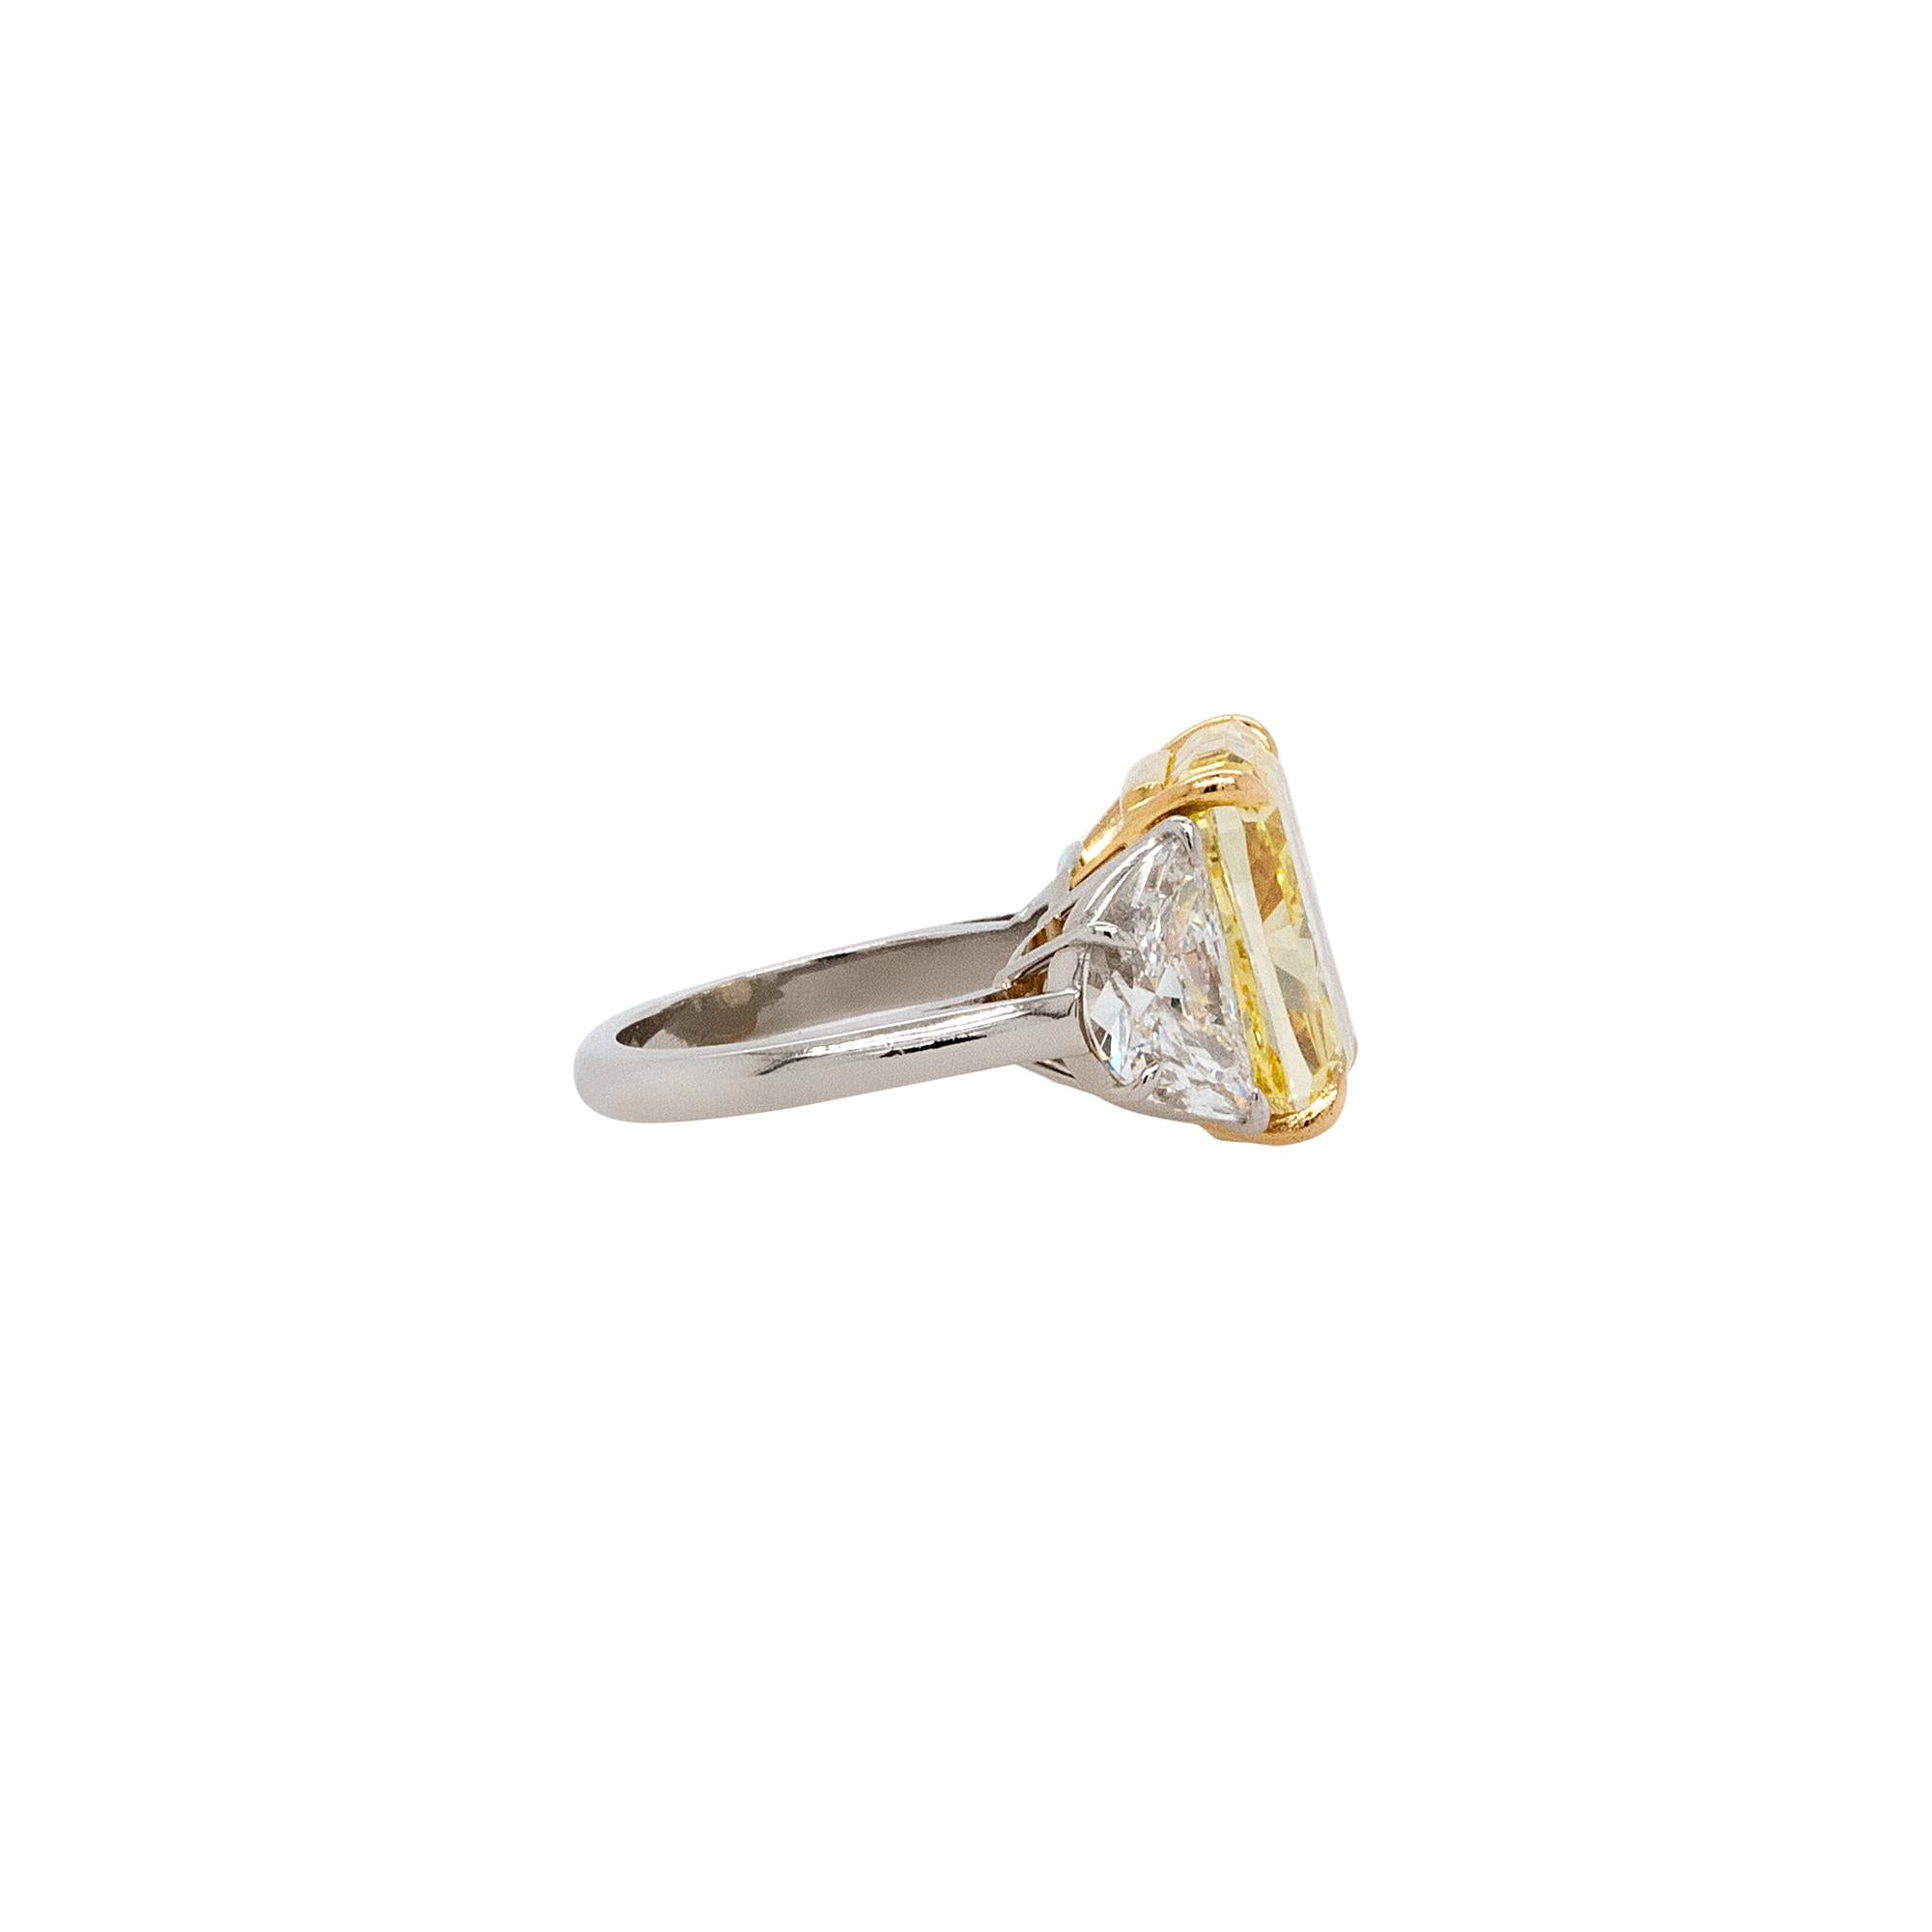 This ring features a stunning combination of platinum and 18k yellow gold, creating a luxurious and timeless design. The centerpiece of the ring is a magnificent 14.21-carat natural fancy vivid yellow color diamond, known for its exceptionally